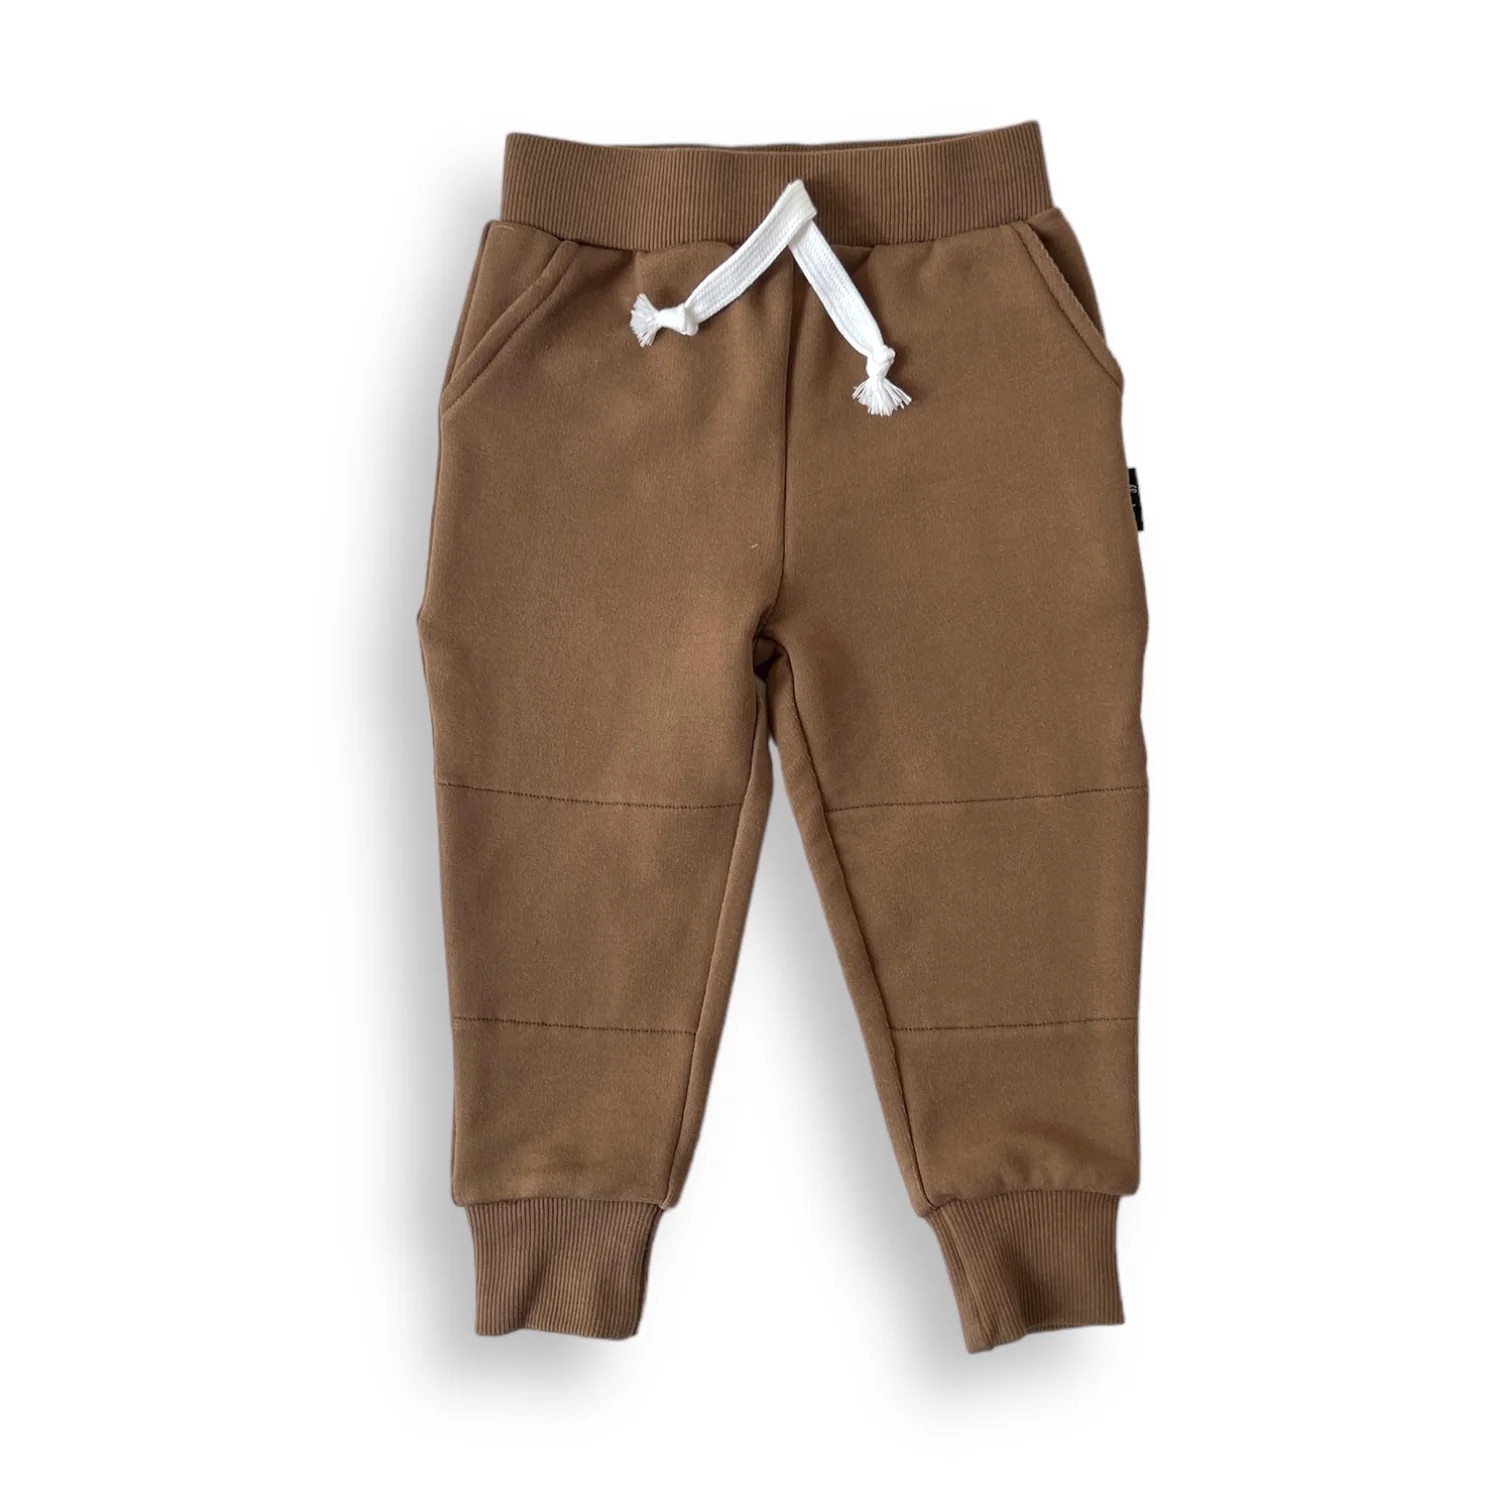 JOGGERS- Mocha Bamboo French Terry | millie + roo